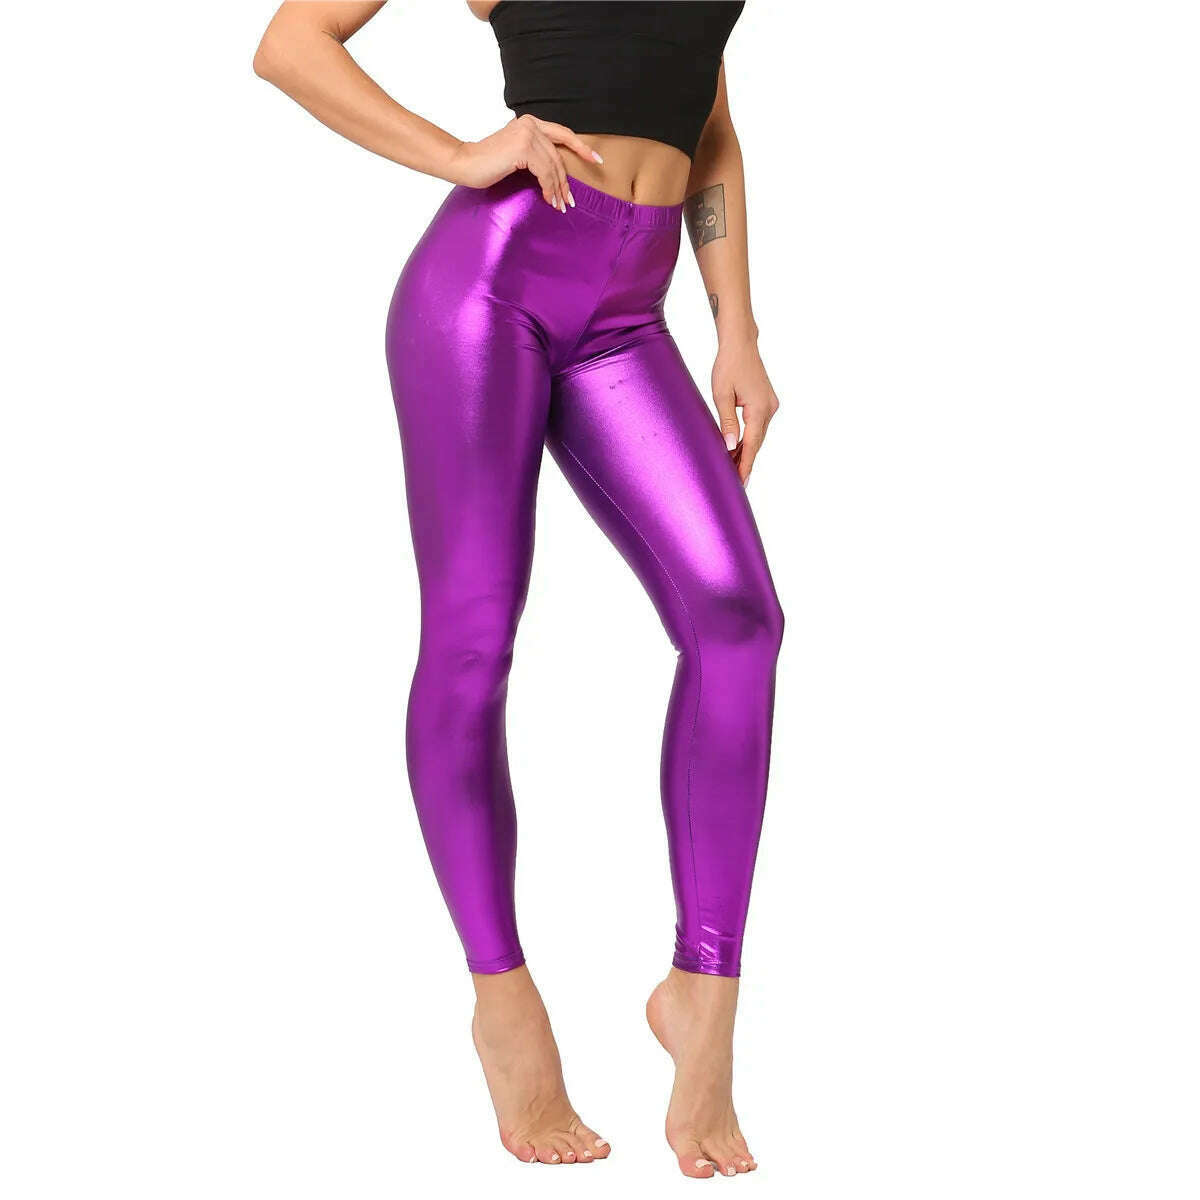 KIMLUD, Metallic Color PU Leggings Women Faux Leather Pants Dancing Party Pant Sexy Night Club Skinny Costume Pants Tight Trousers, Purple / One size 50kg below, KIMLUD Womens Clothes